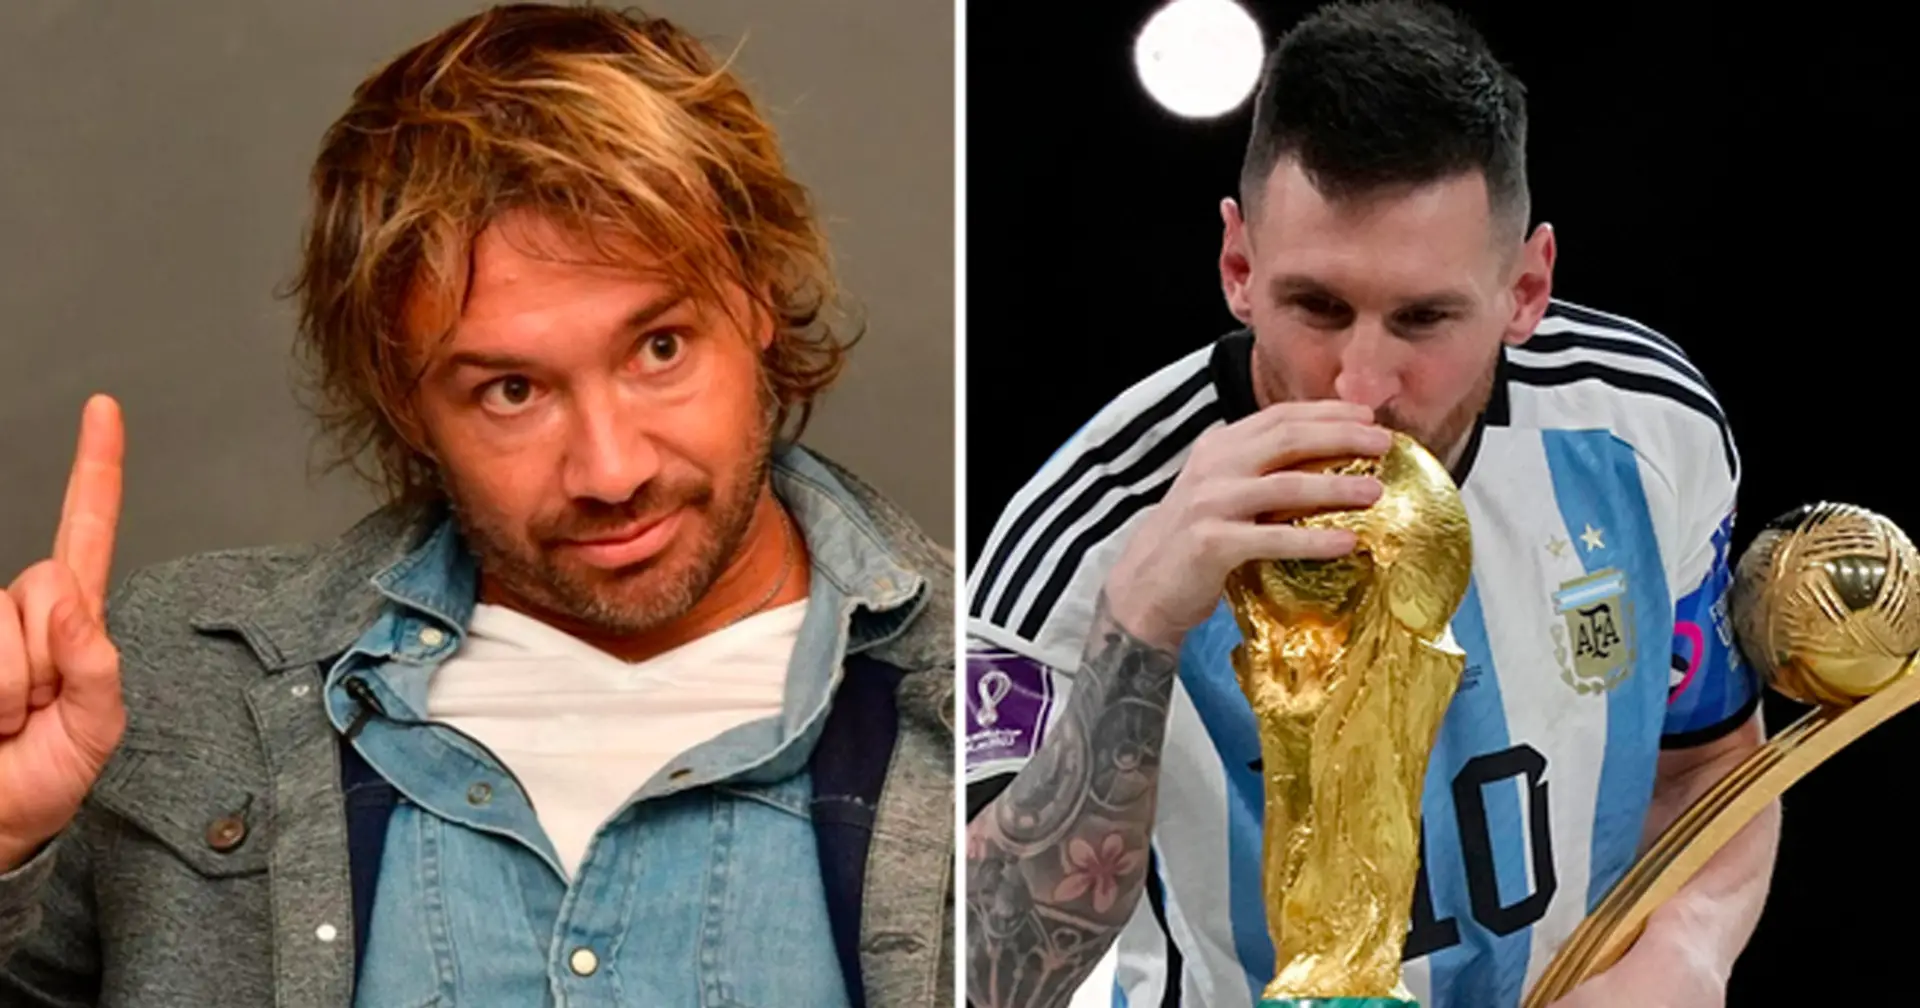 'FIFA helped Argentina become world champions. They wanted to promote Messi': ex-Uruguay player Lugano